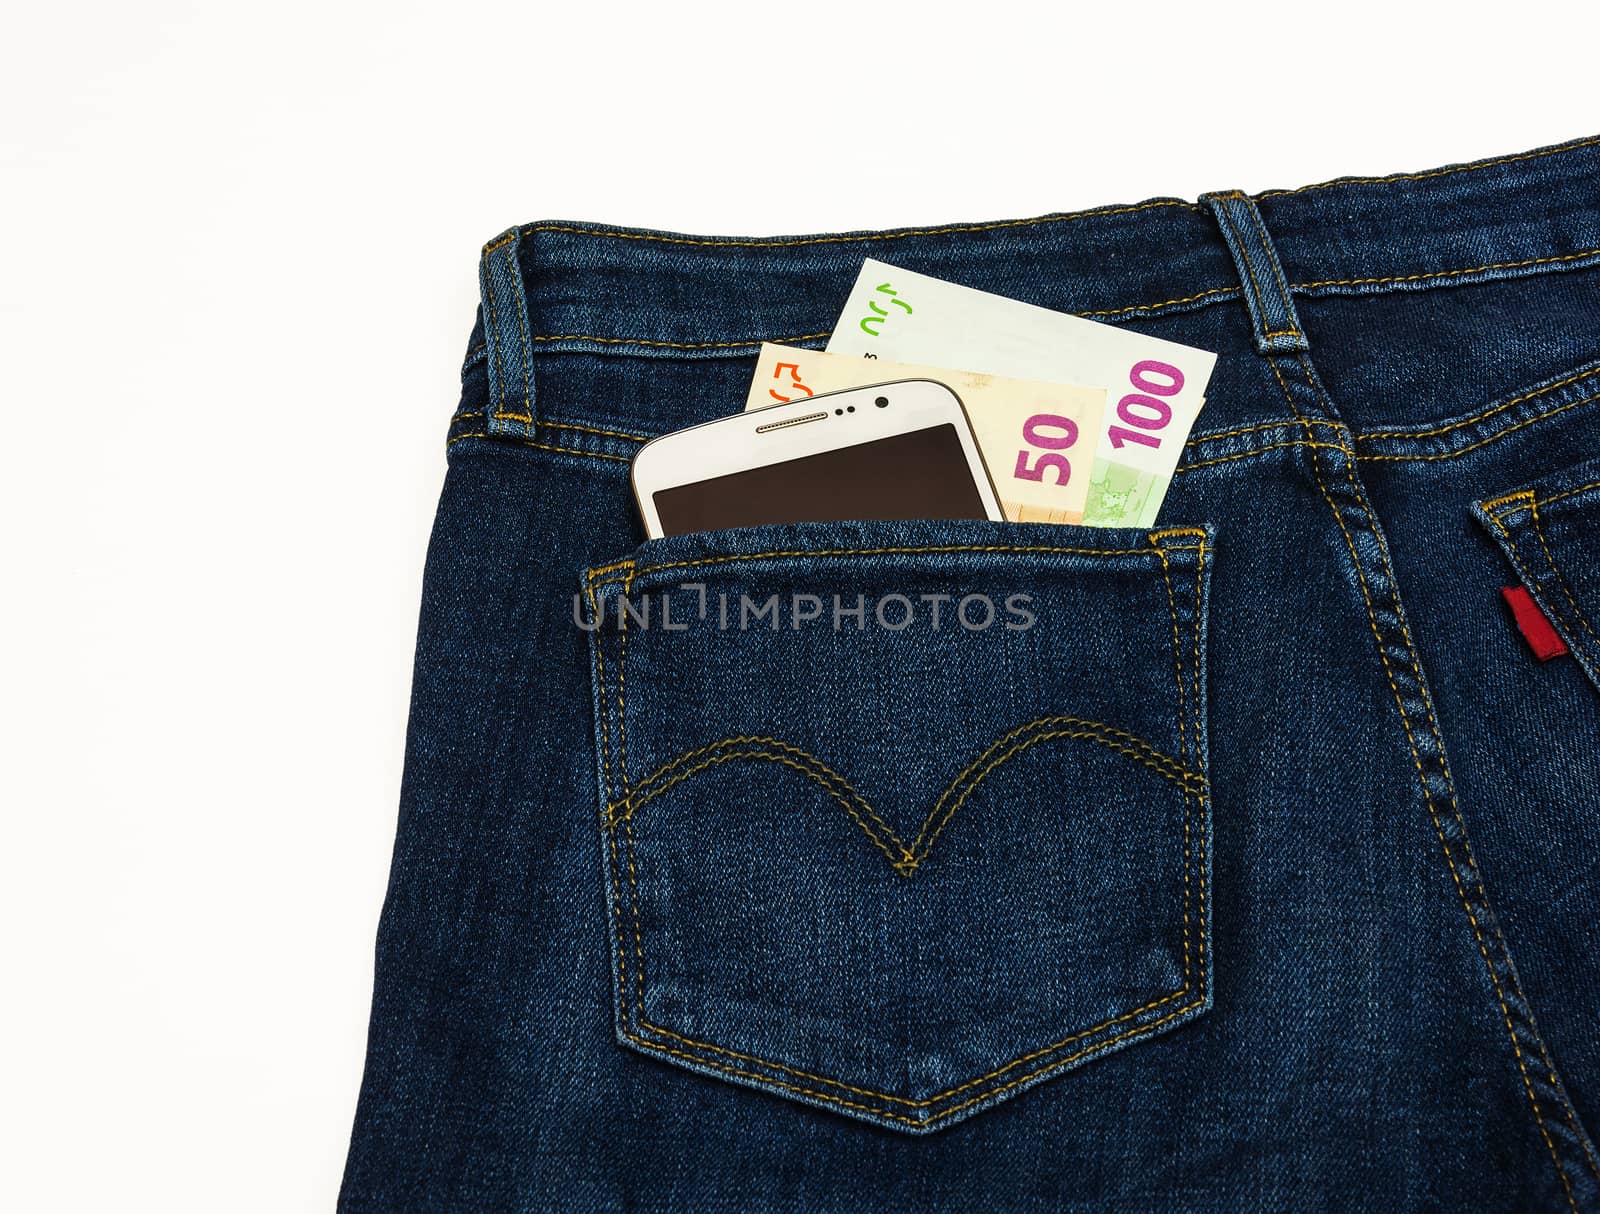 In the pants pocket of a blue denim is a smartphone and banknote by Grommik